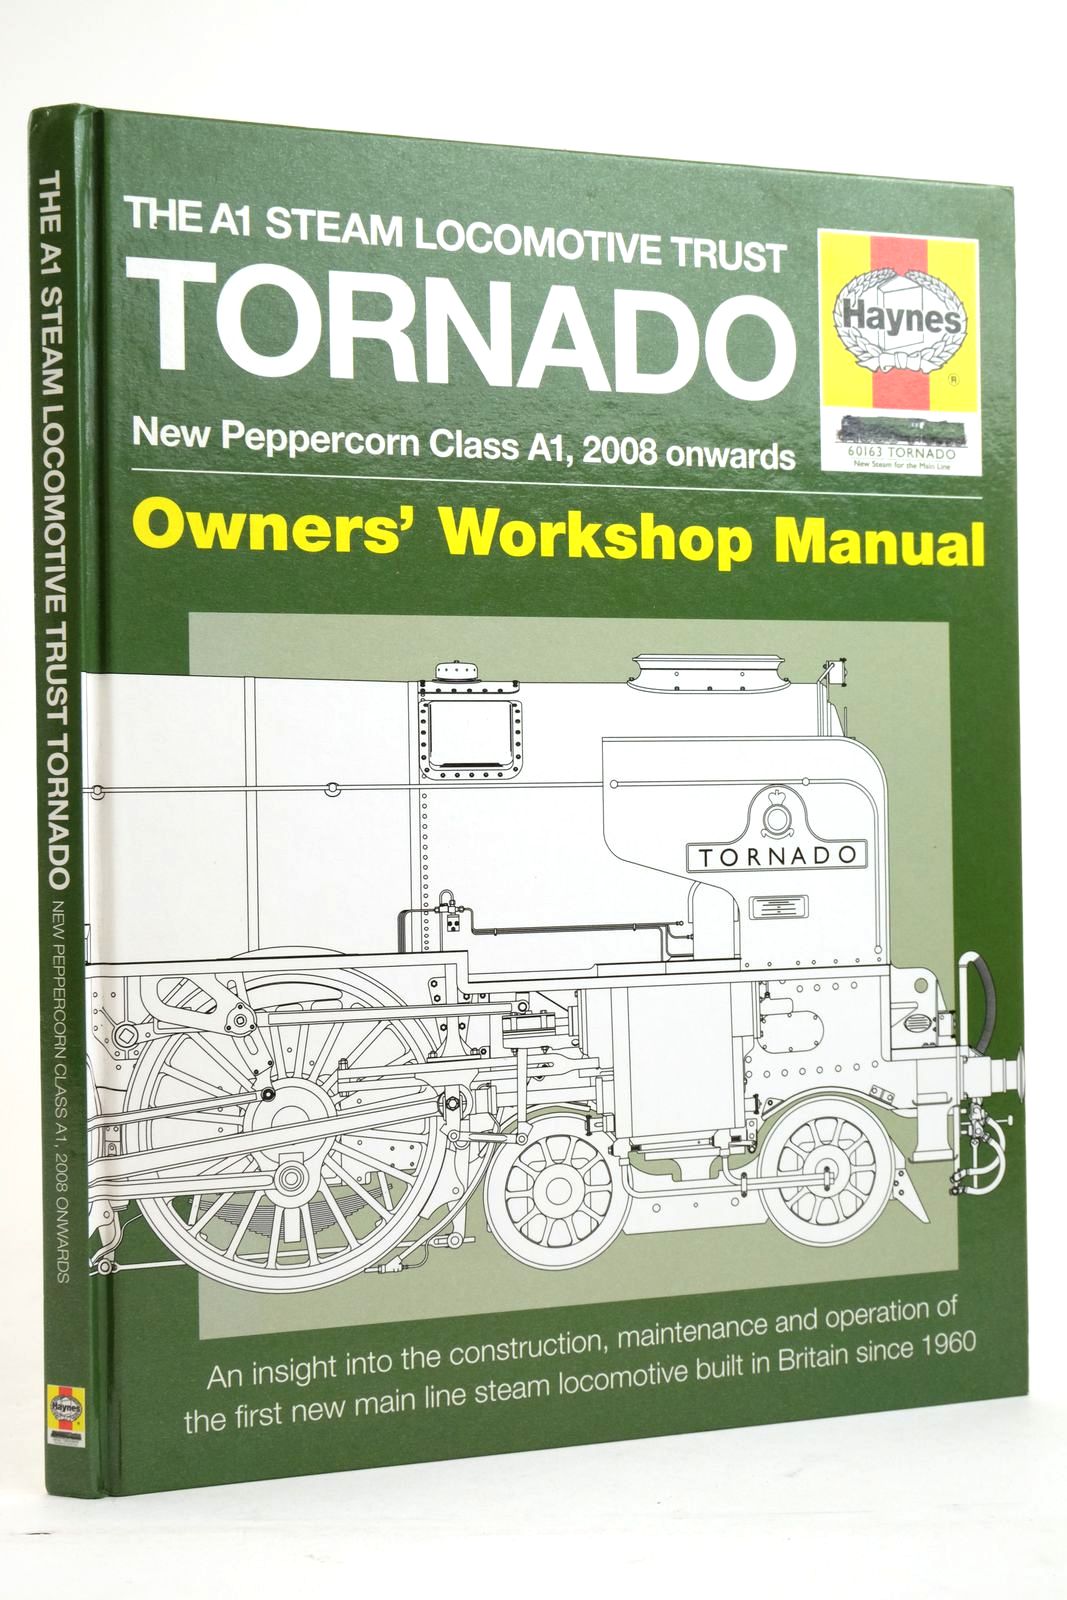 Photo of THE A1 STEAM LOCOMOTIVE TRUST TORNADO NEW PEPPERCORN CLASS A1, 2008 ONWARDS OWNDERS' WORKSHOP MANUAL written by Smith, Geoff published by Haynes Publishing Group (STOCK CODE: 2135991)  for sale by Stella & Rose's Books